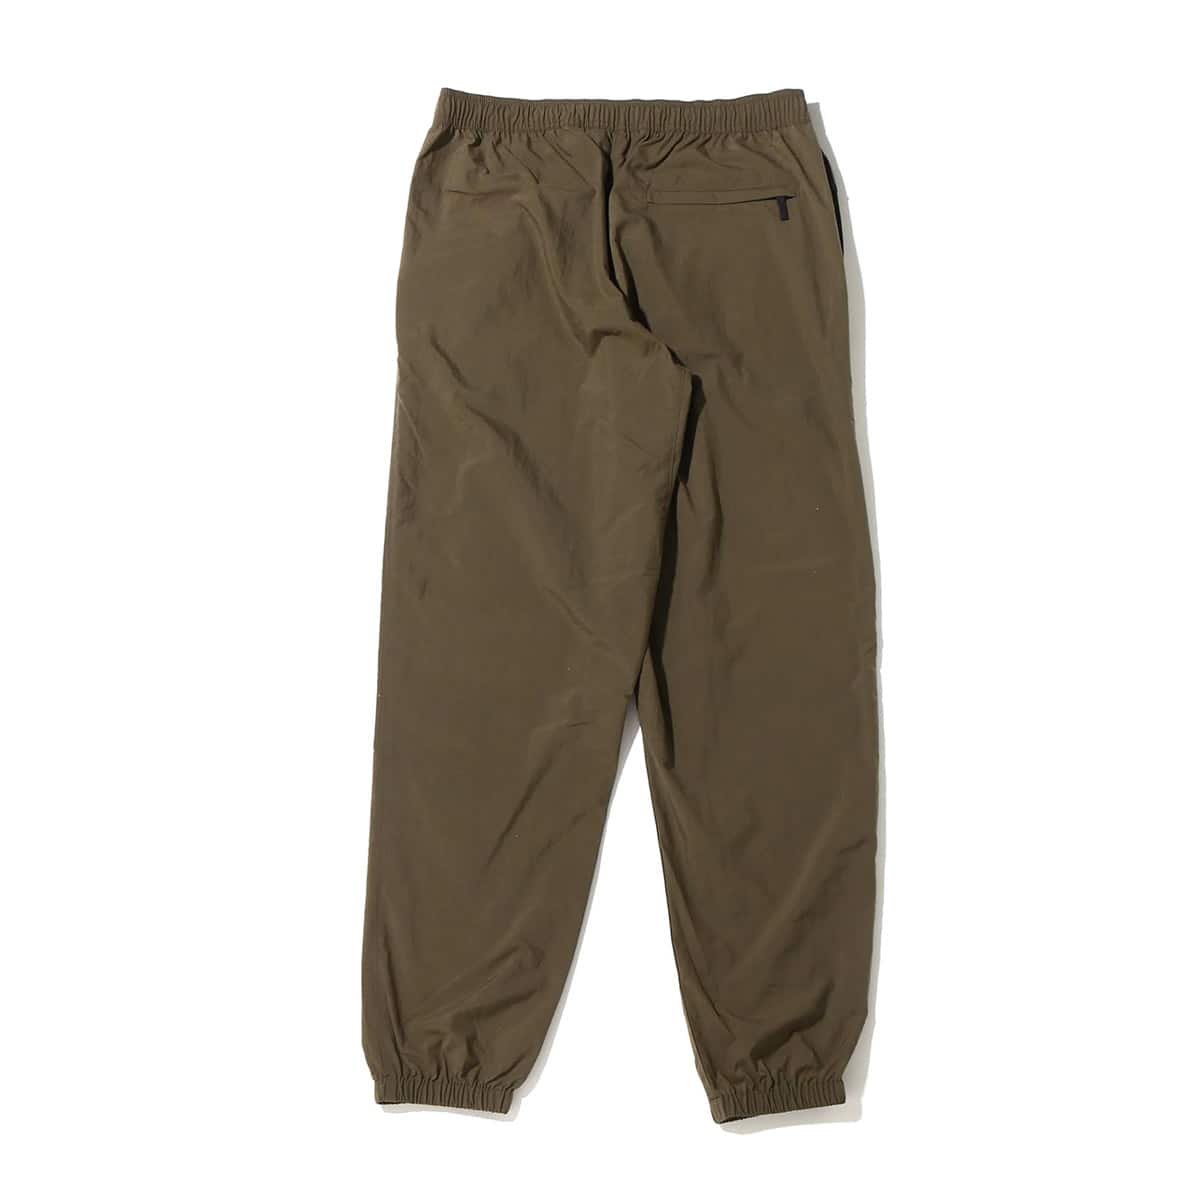 THE NORTH FACE VERSATILE PANT NEWTAUPE 24SS-I